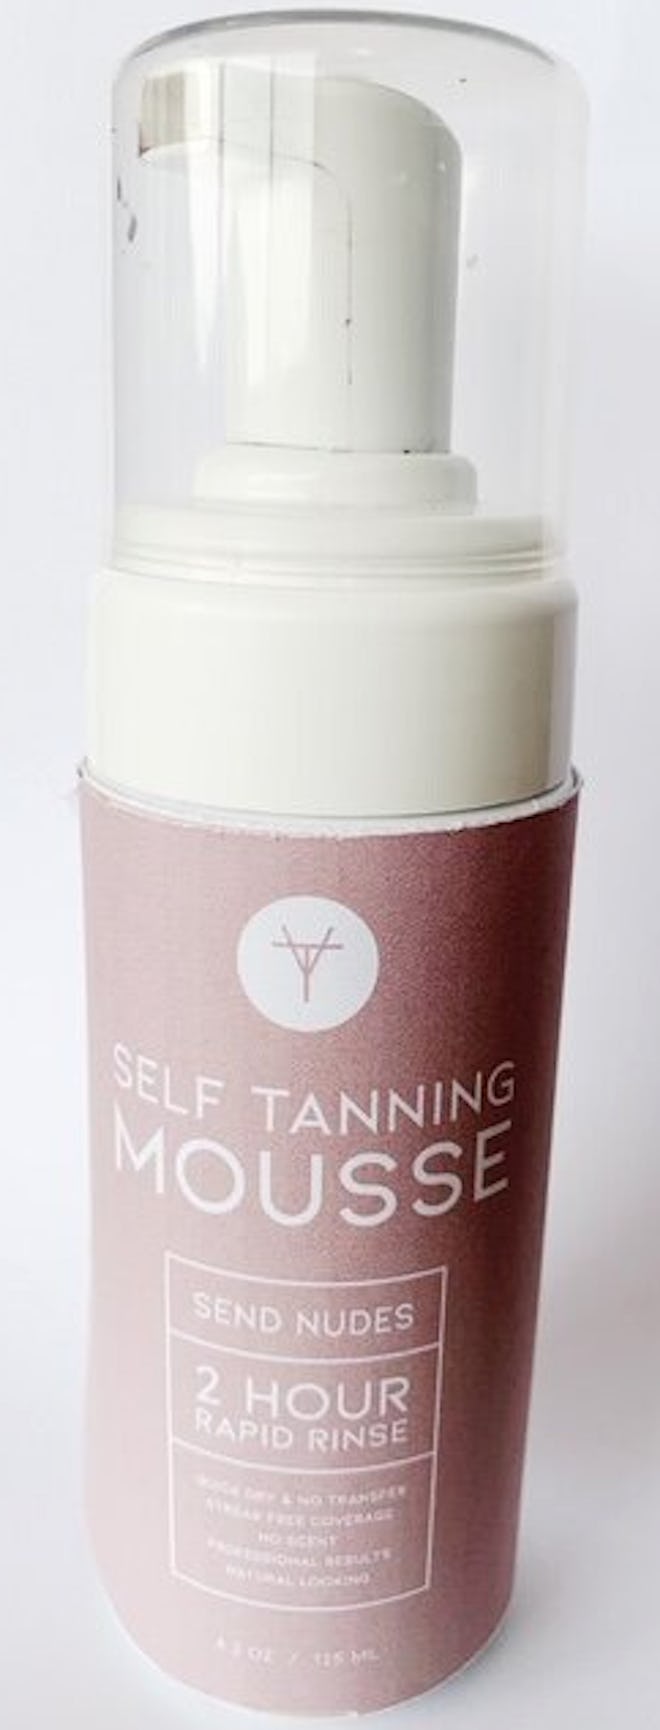 2 Hour Rapid Rinse Self-Tanning Mousse